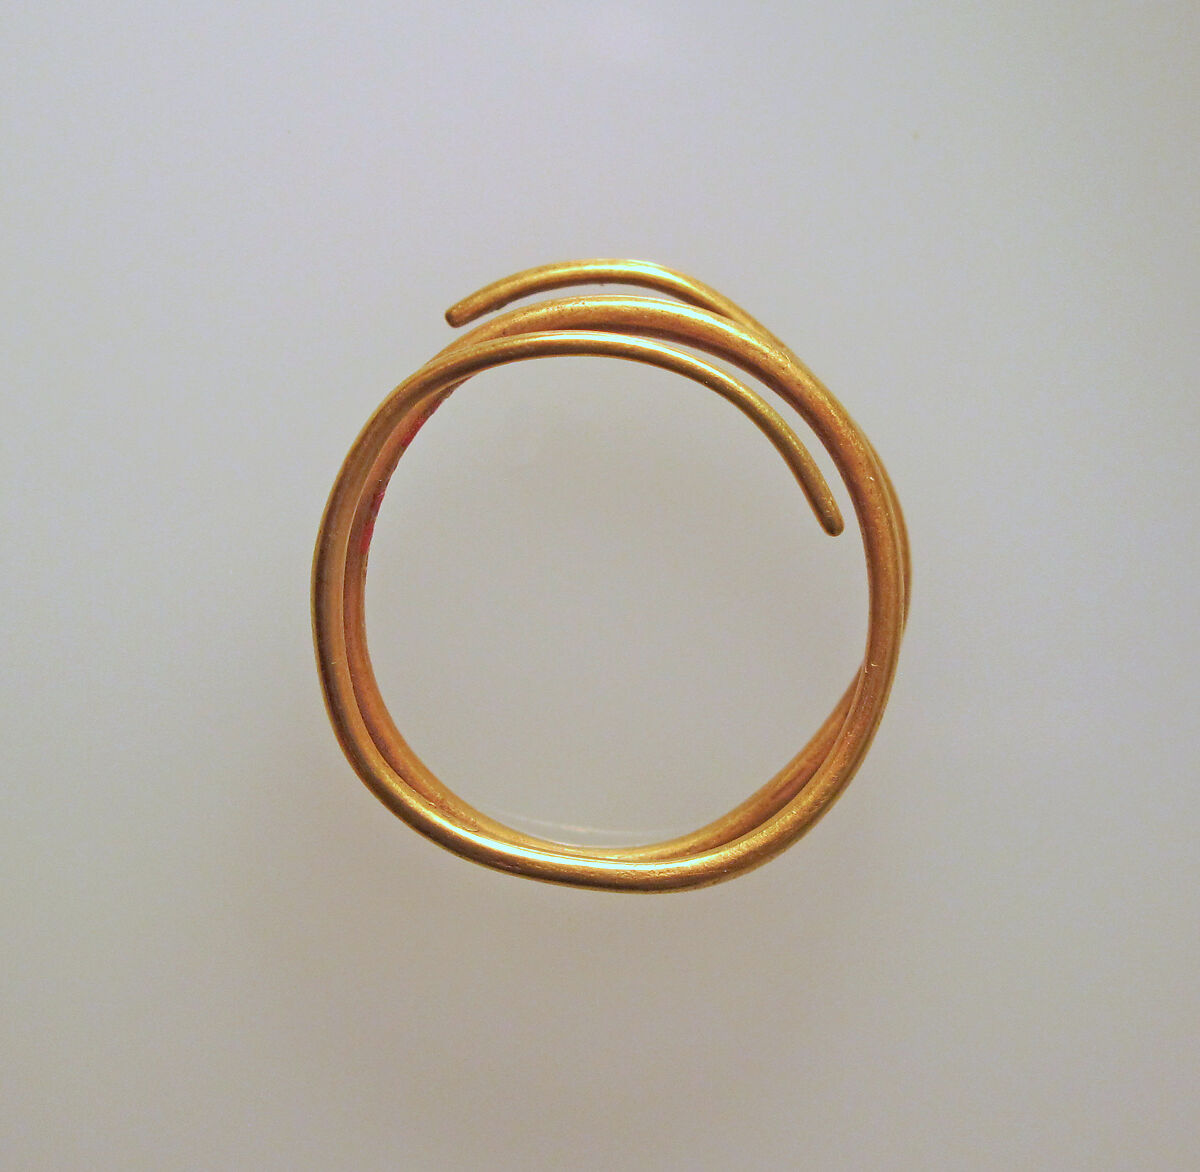 Earring or spiral, Gold, Cypriot 